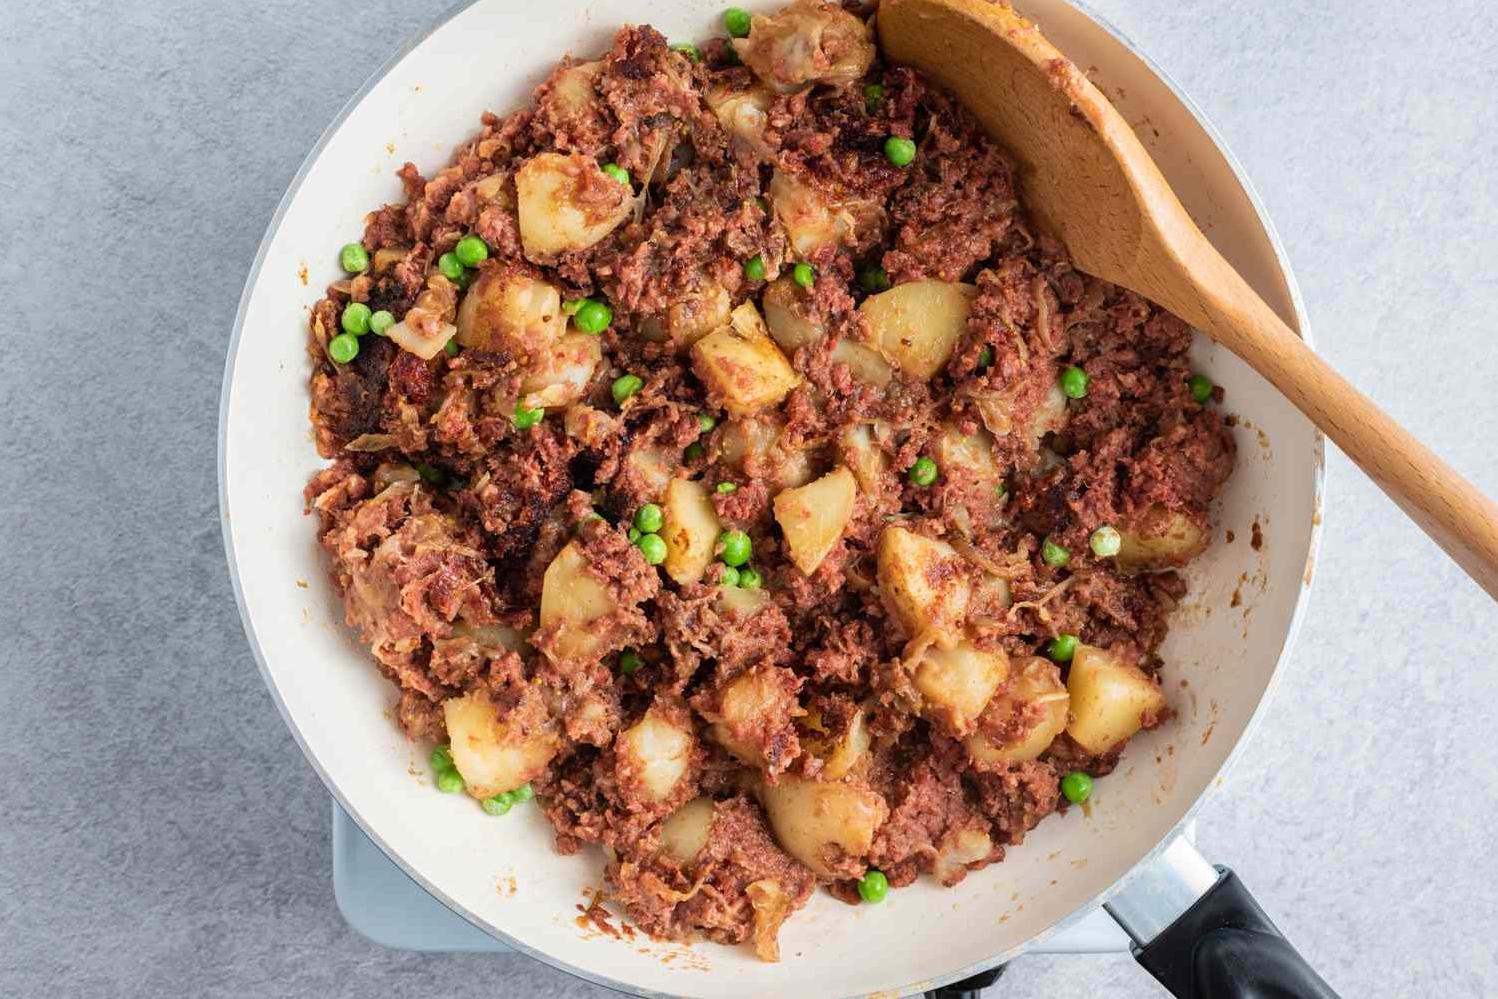  Golden brown potatoes and tender corned beef make this hash a comforting breakfast.